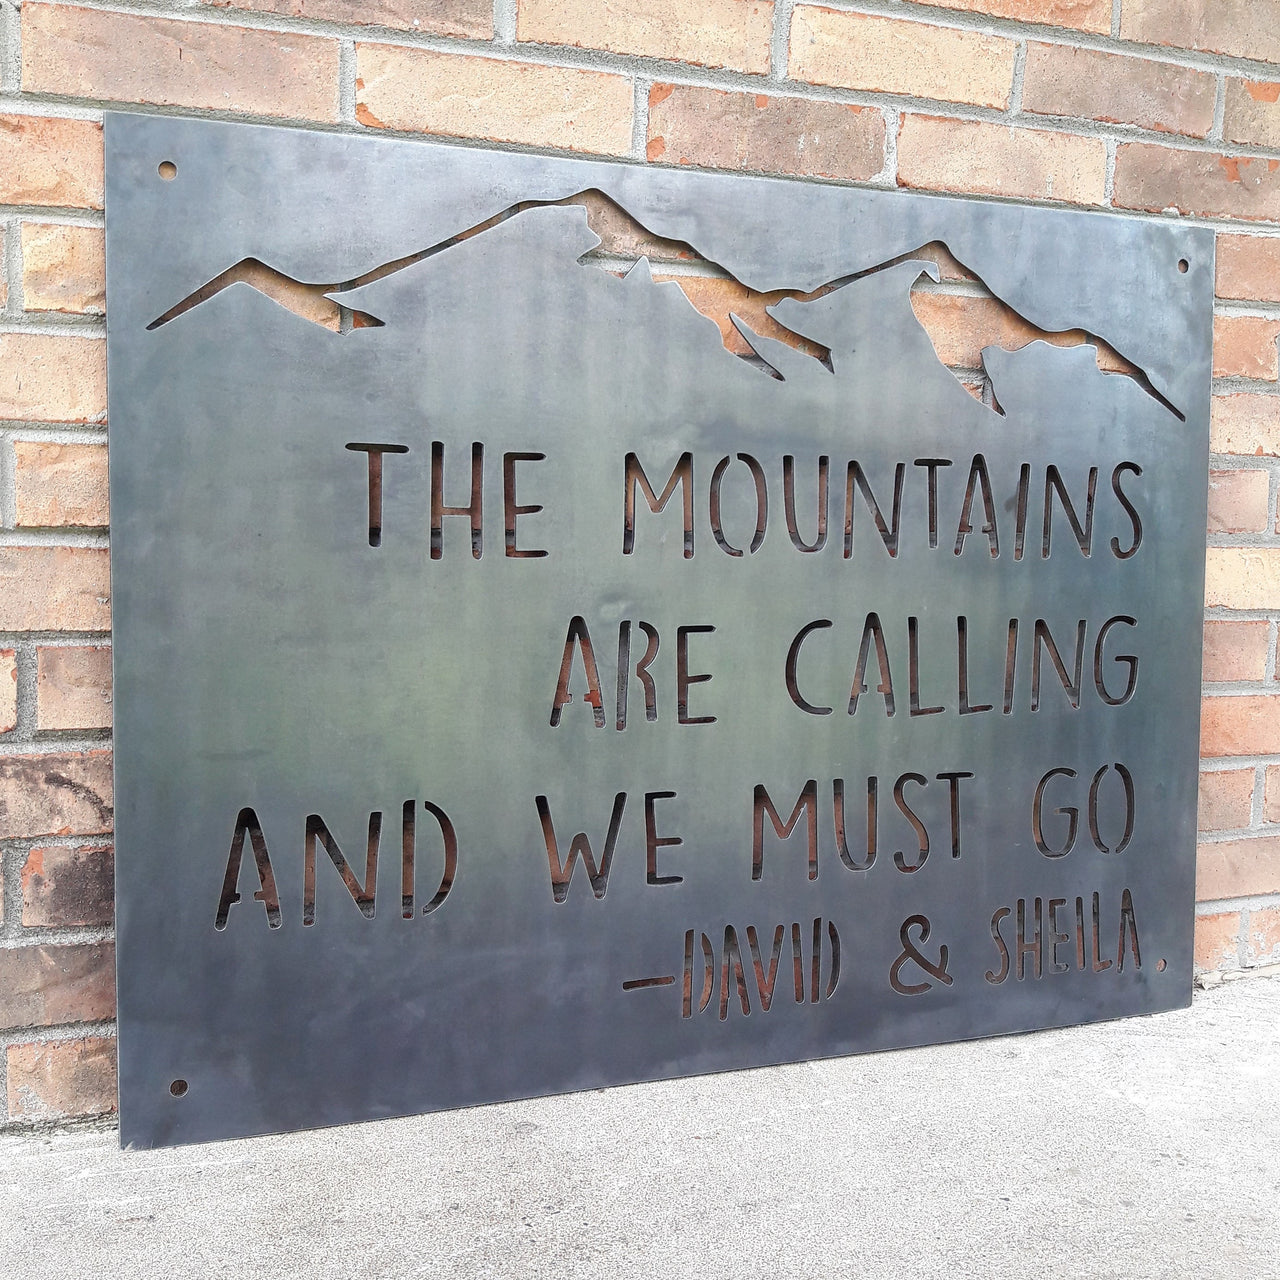 This Metal sign has a mountain range across the top and features a quote by John Muir. The sign reads, "The Mountains Are Calling And I must Go, David and Sheila".